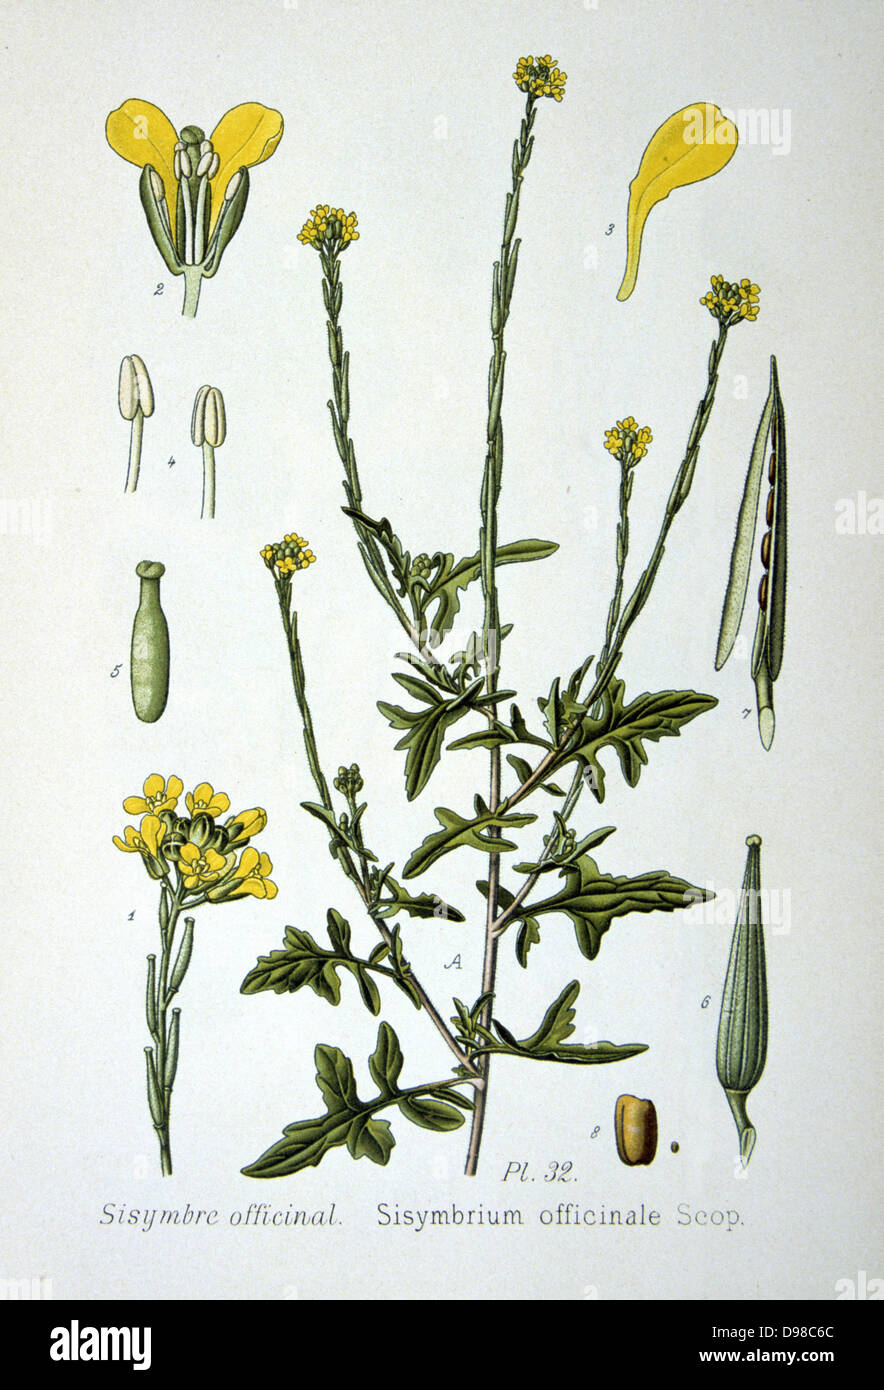 Hedge Mustard (Sisymbrium officinale) a weed of arable and wasteland, native to Europe and North Africa. In folk medicine it has been used as an expectorant, a diuretic, a laxative, and a tonic. The Ancient Greeks believed it to be an antidote for all poisons. From Amedee Masclef 'Atlas des Plantes de France', Paris, 1893. Stock Photo